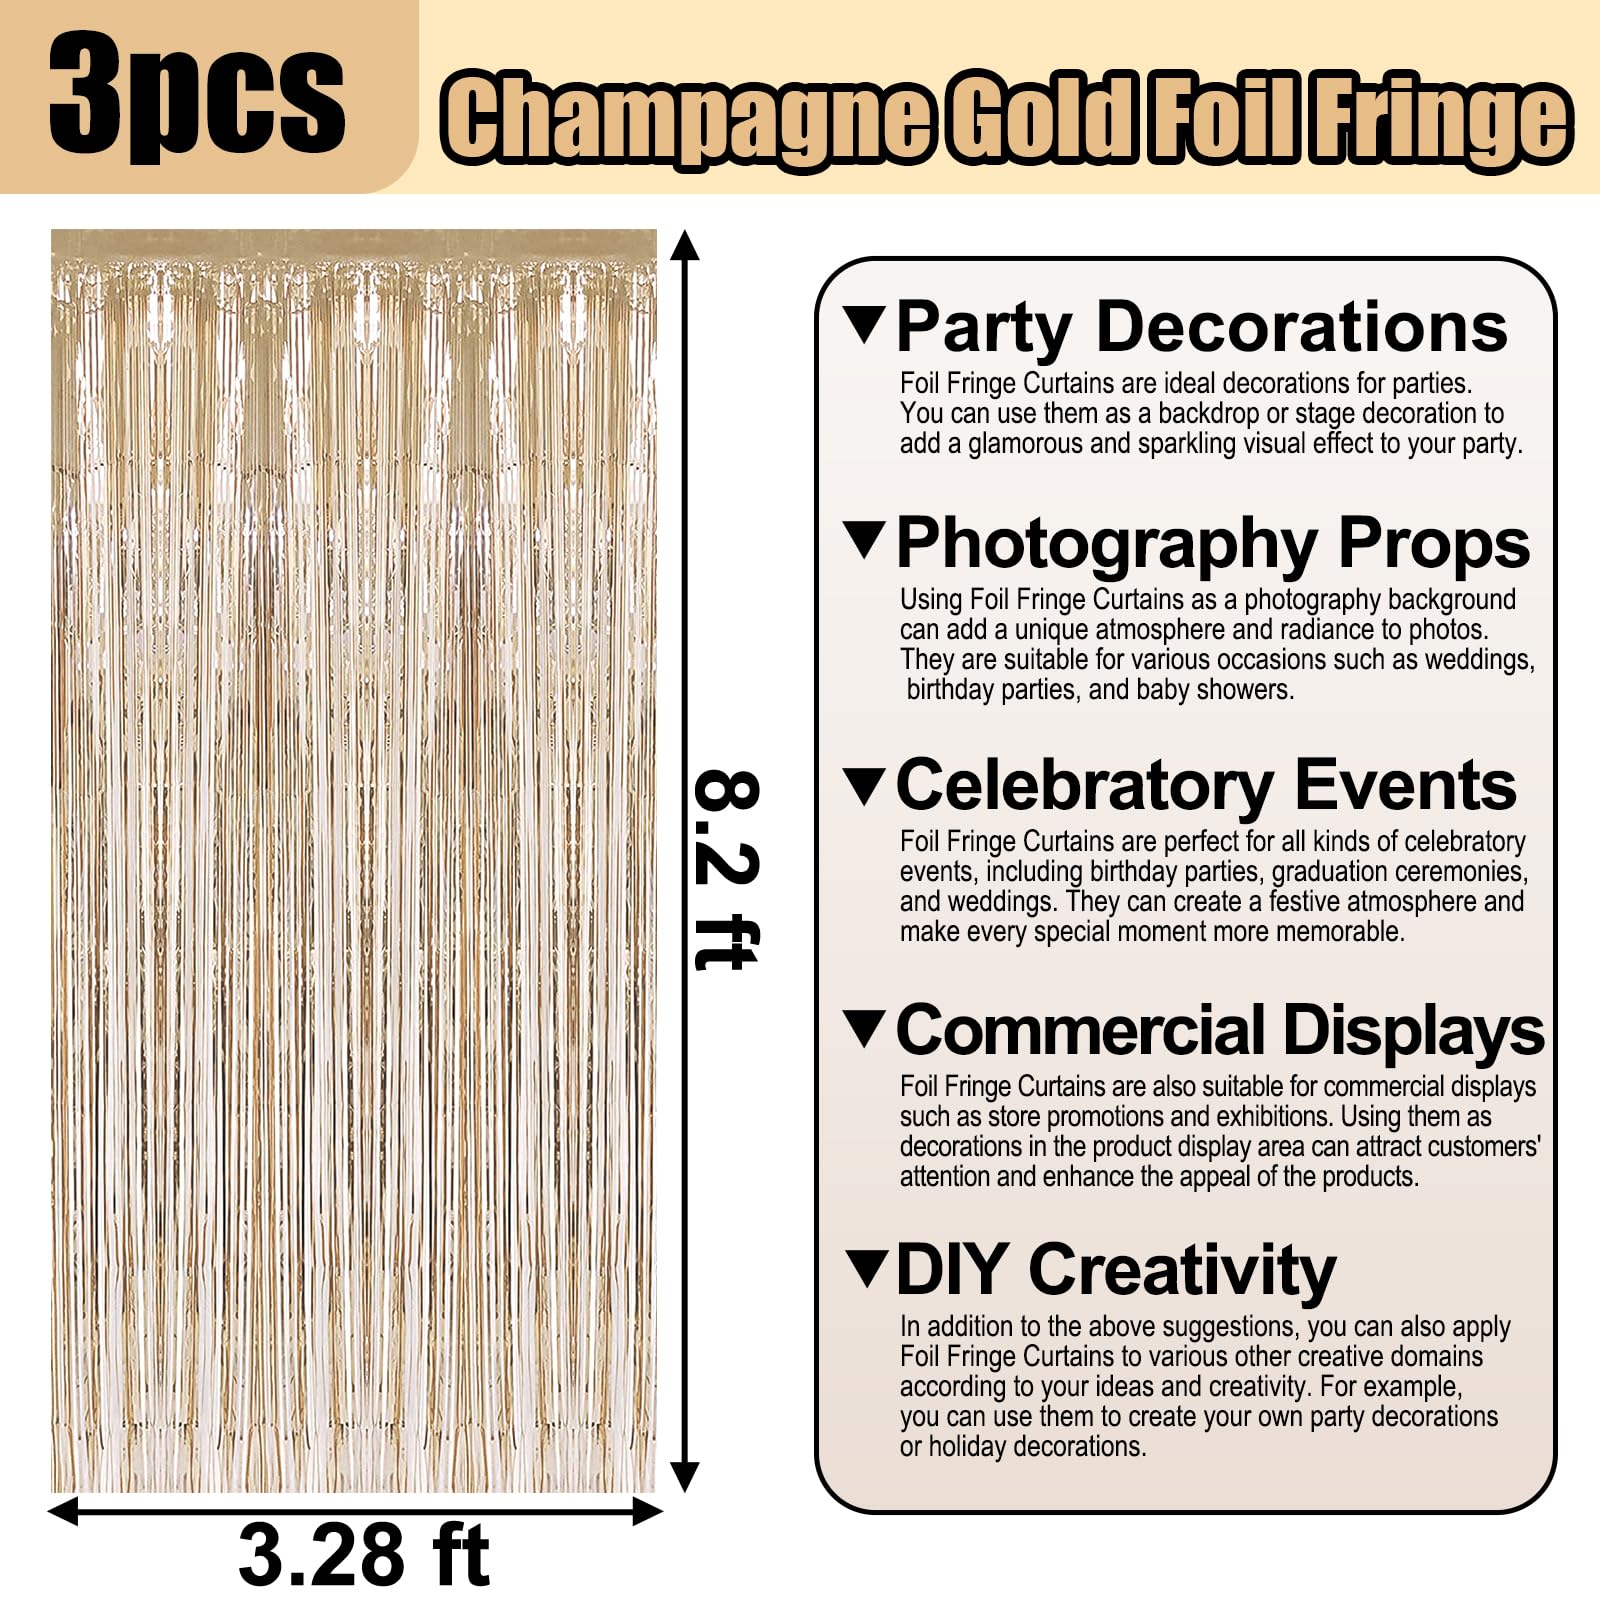 3 Pack Champagne Gold Foil Fringe Curtain Backdrop, 3.28Ft x 8.2Ft Metallic Tinsel Foil Fringe Streamer Curtains for Photo Booth, Valentine's Day， Wedding, Birthday, New Year Party Decorations